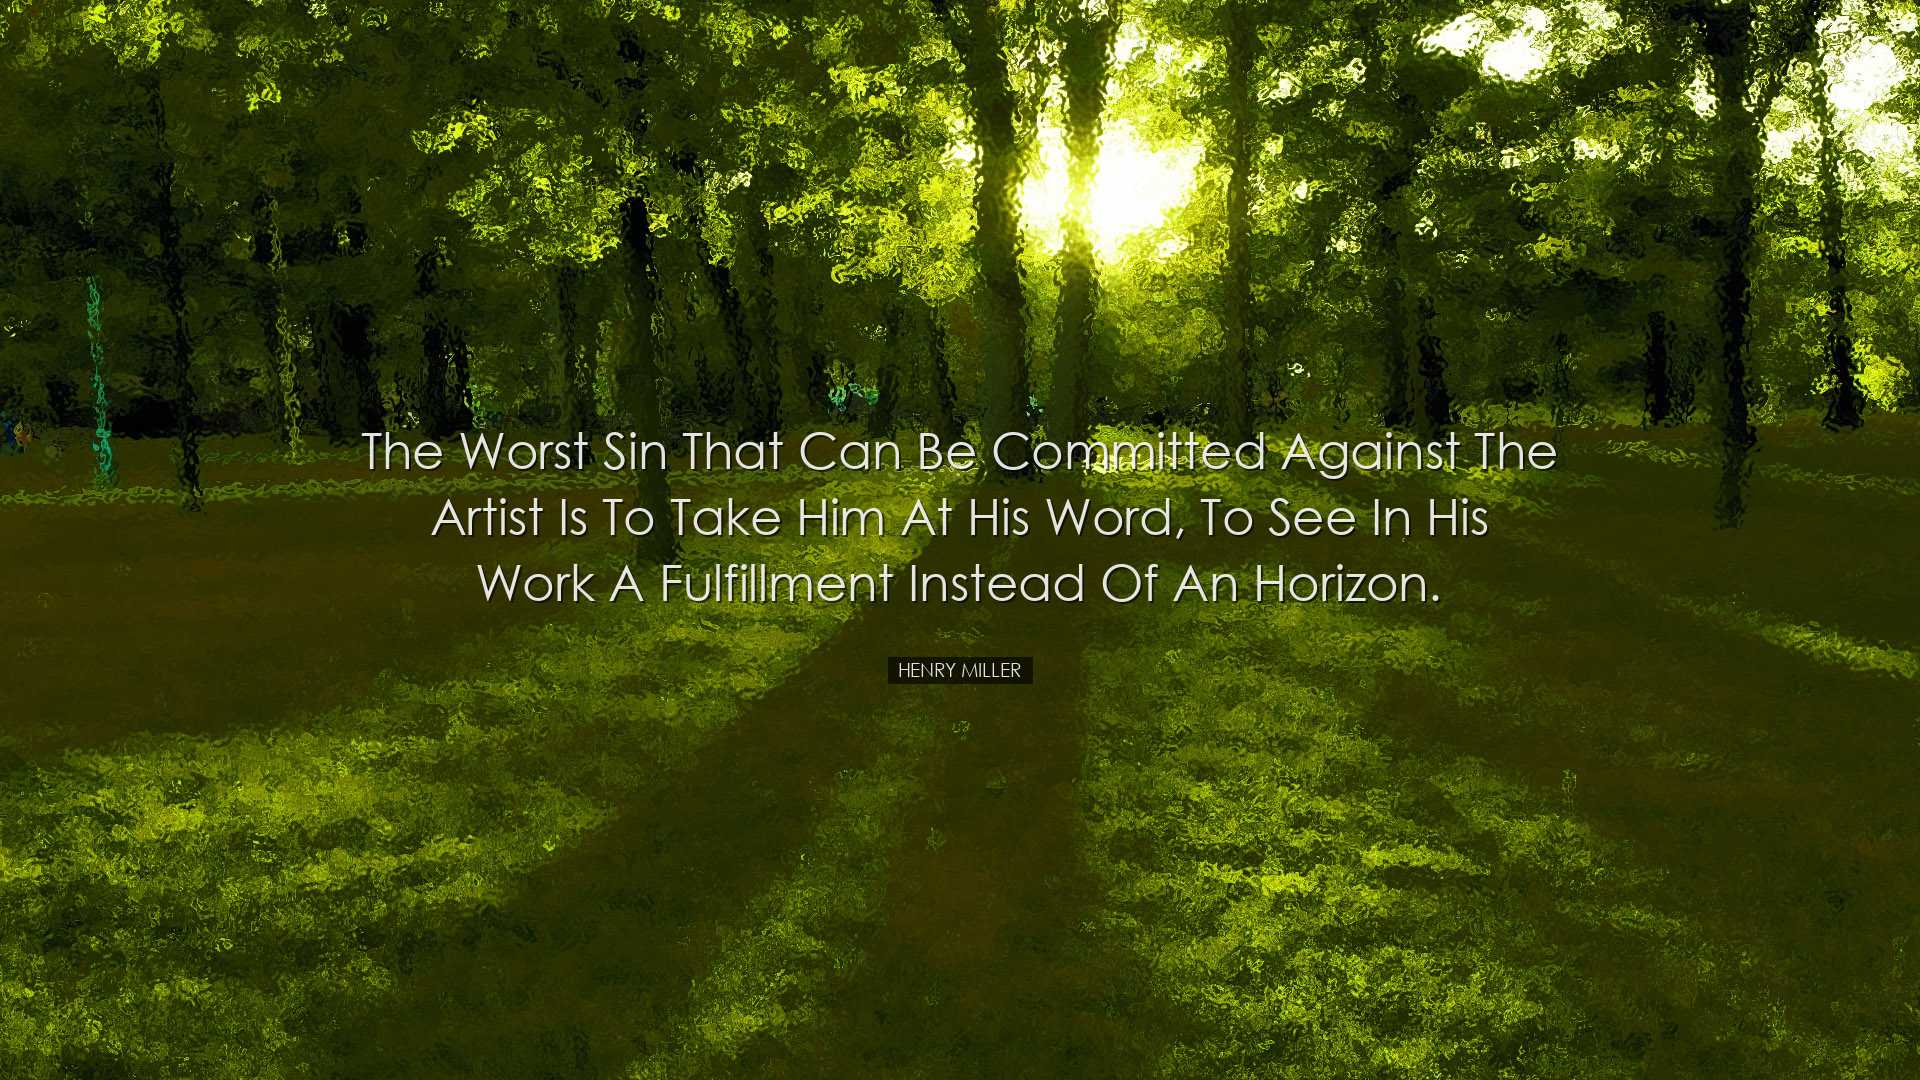 The worst sin that can be committed against the artist is to take